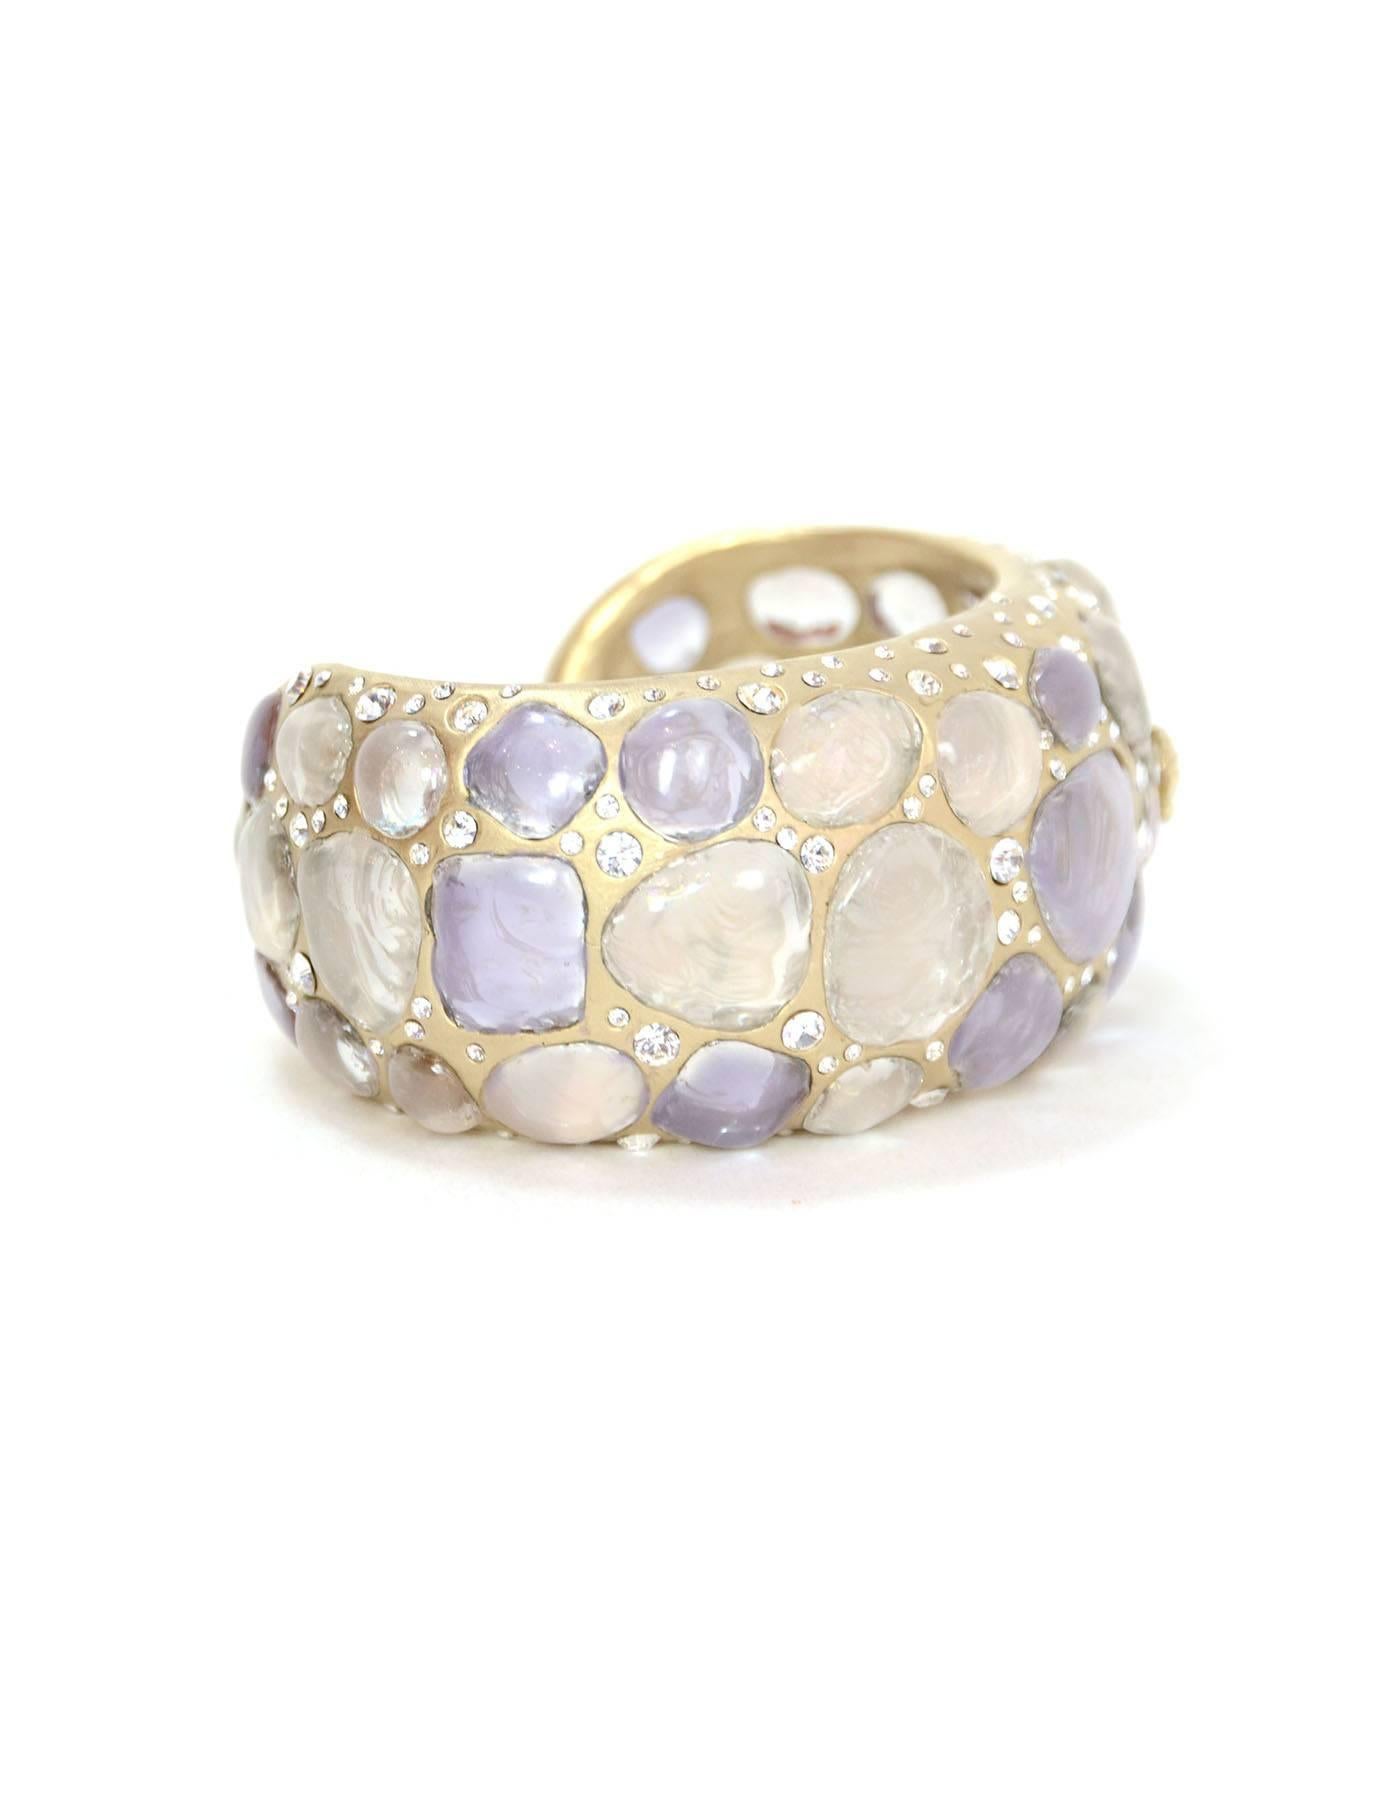 Chanel Lavender Glass & Rhinestone Silver Cuff 
Features pale goldtone CC on front

Made In: Italy
Color: Pale goldtone, purple, clear
Materials: Metal, crystal, and glass
Closure: None
Stamp: P CC
Overall Condition: Excellent pre-owned condition